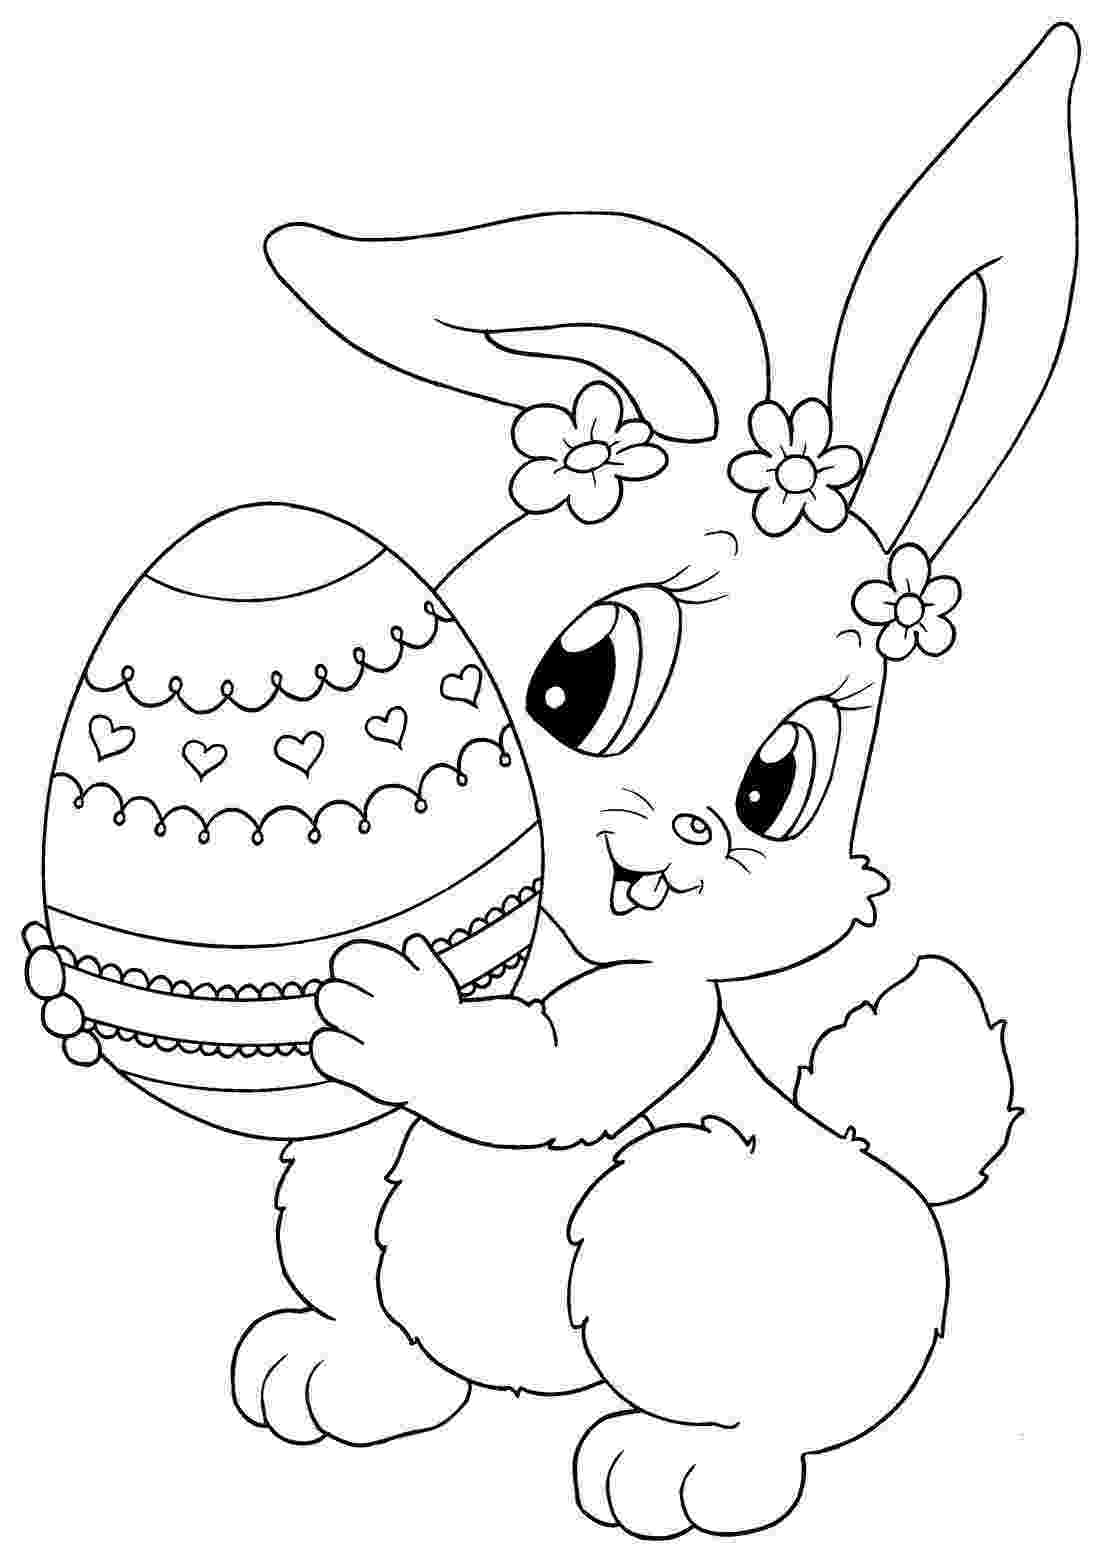 colouring easter bunny easter coloring page easter bunny colouring bunny bunny easter colouring 